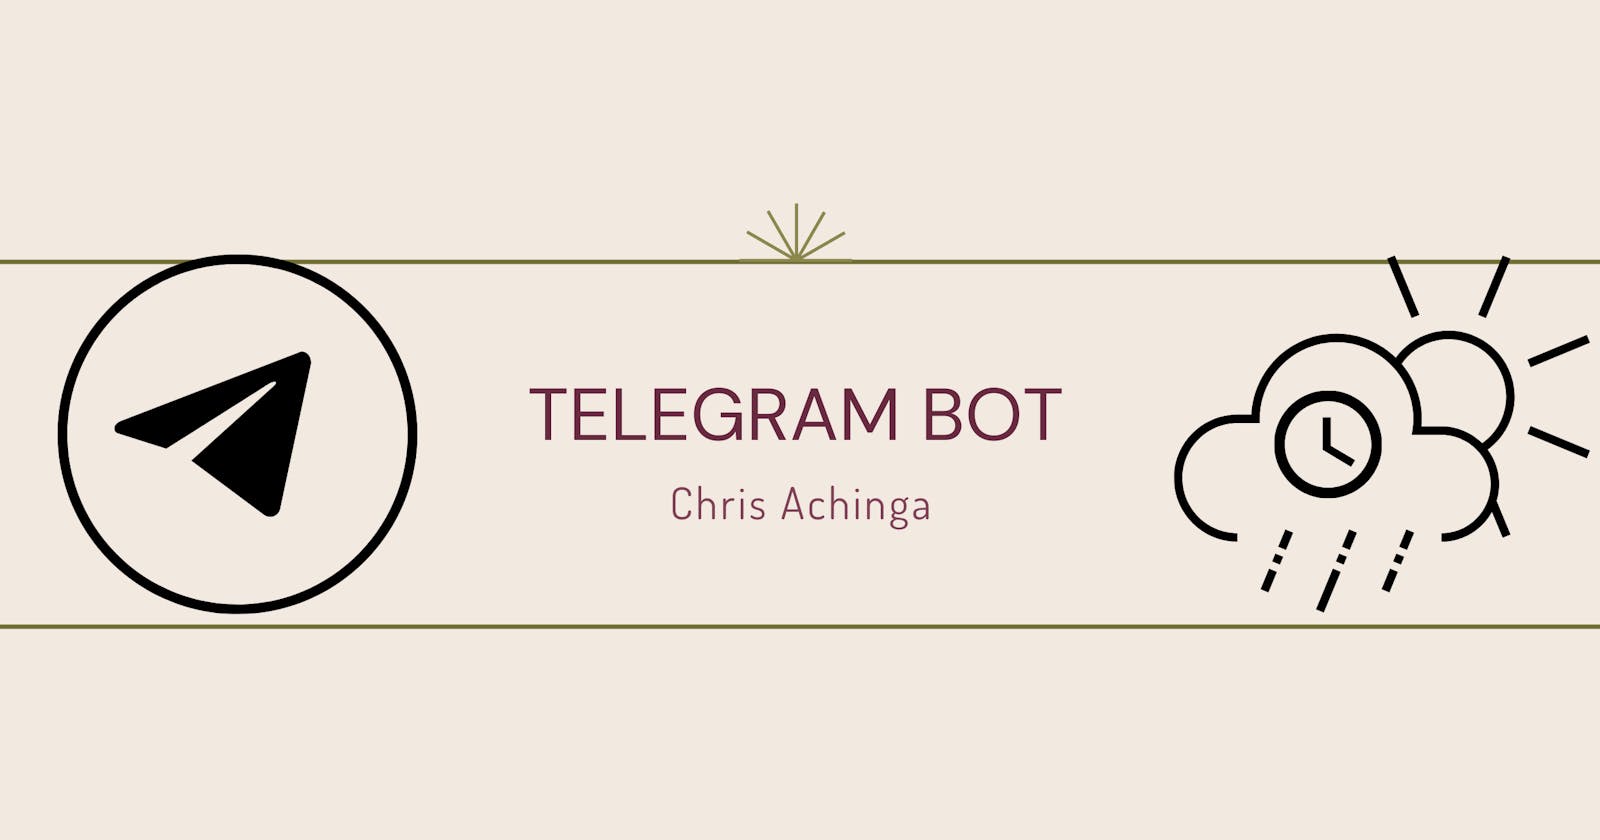 Building a Weather and Time Telegram Bot using Node.js